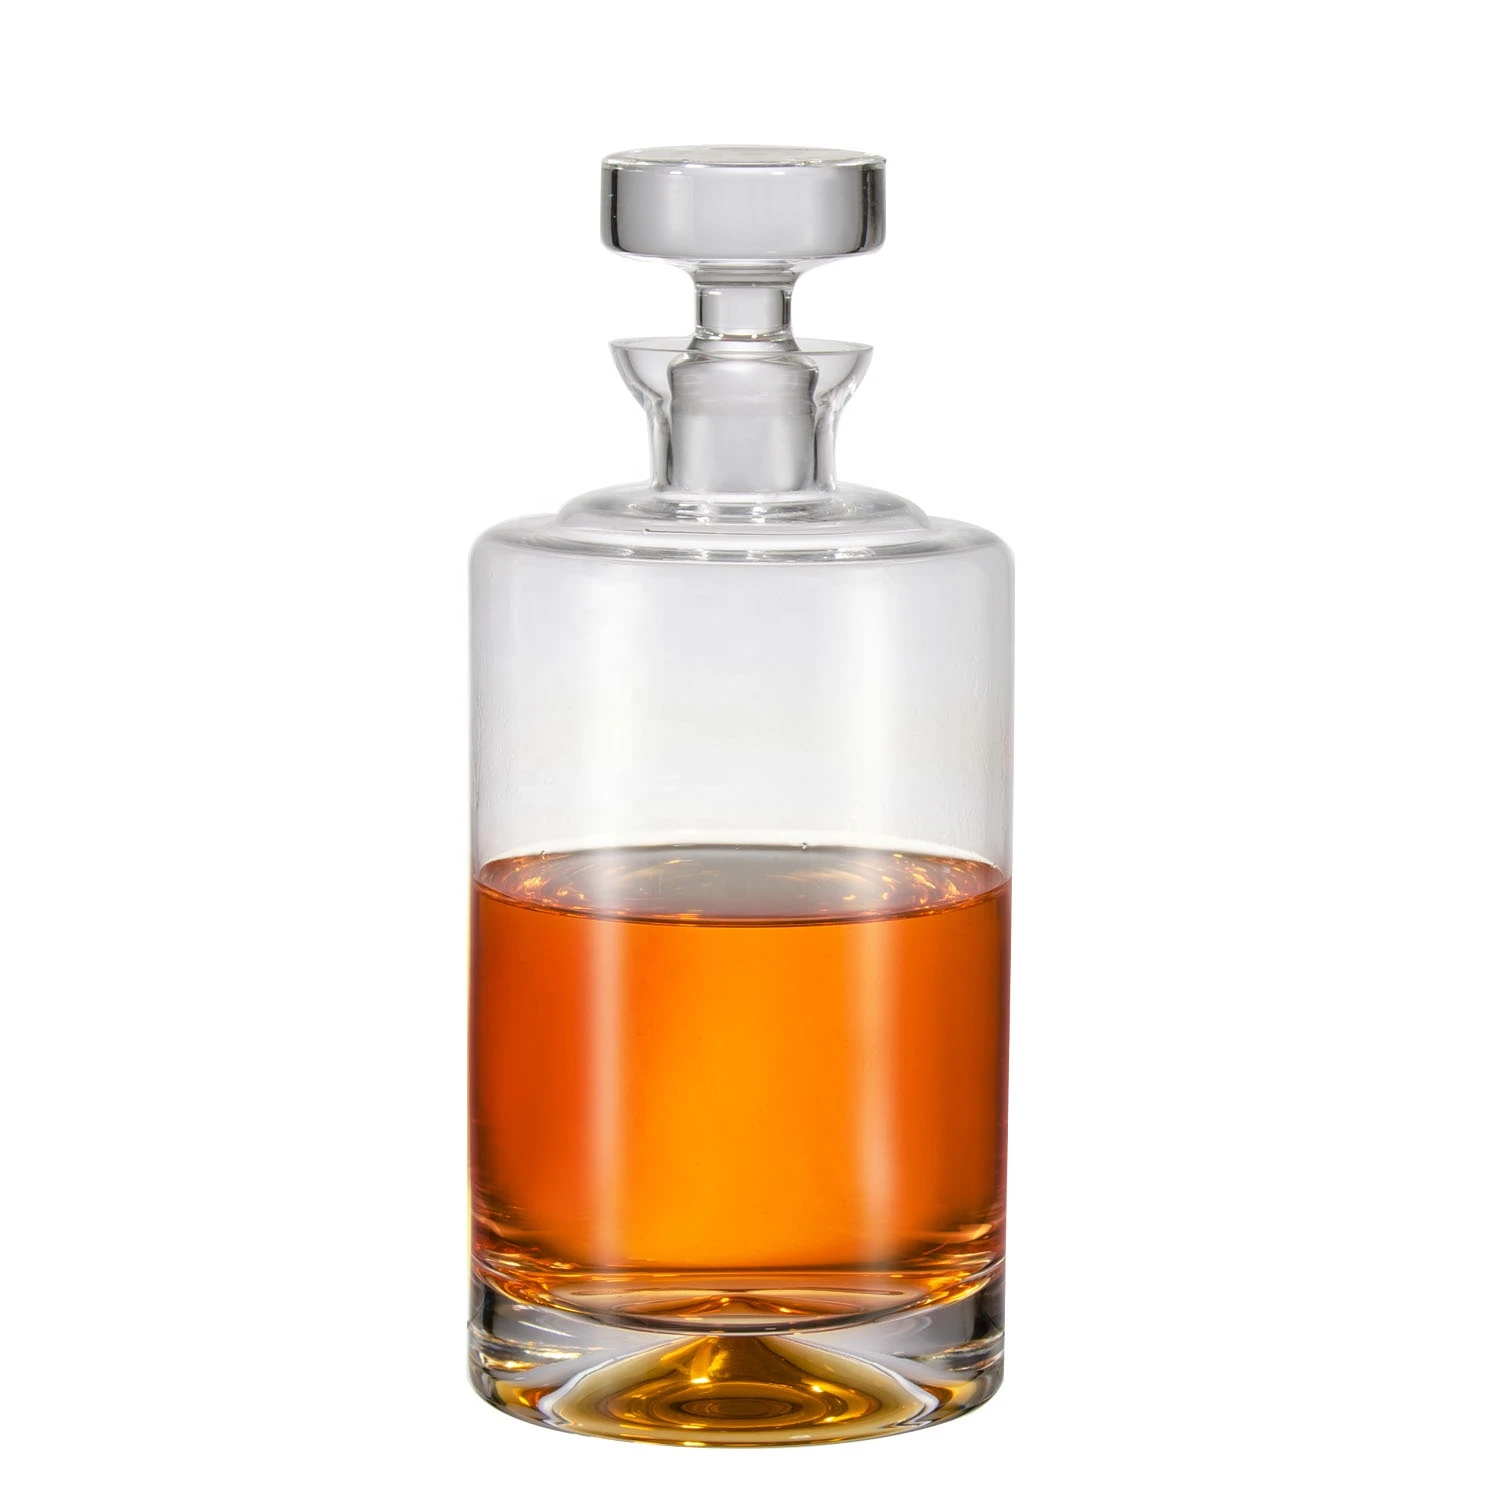 Wholesale Crystal Clear Mouth Blown Fashion Liquor Whiskey Decanter Set Whisky Bottle Glass Whiskey Decanter